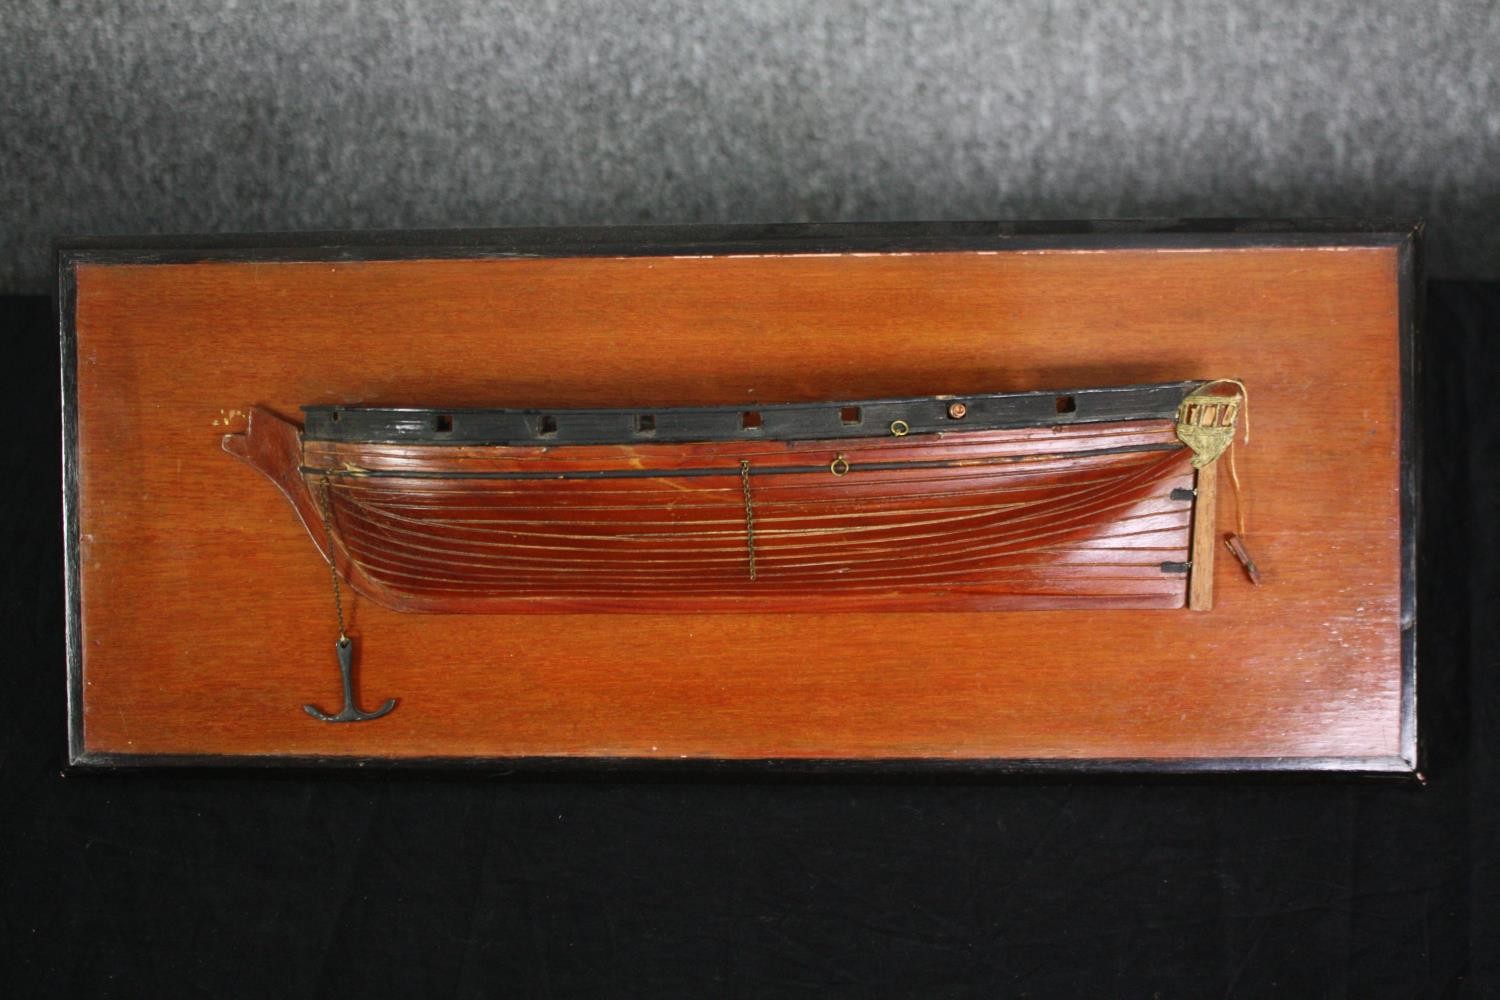 A scratch built model of a boat hull on a wall mounting panel. H.20 W.49cm.